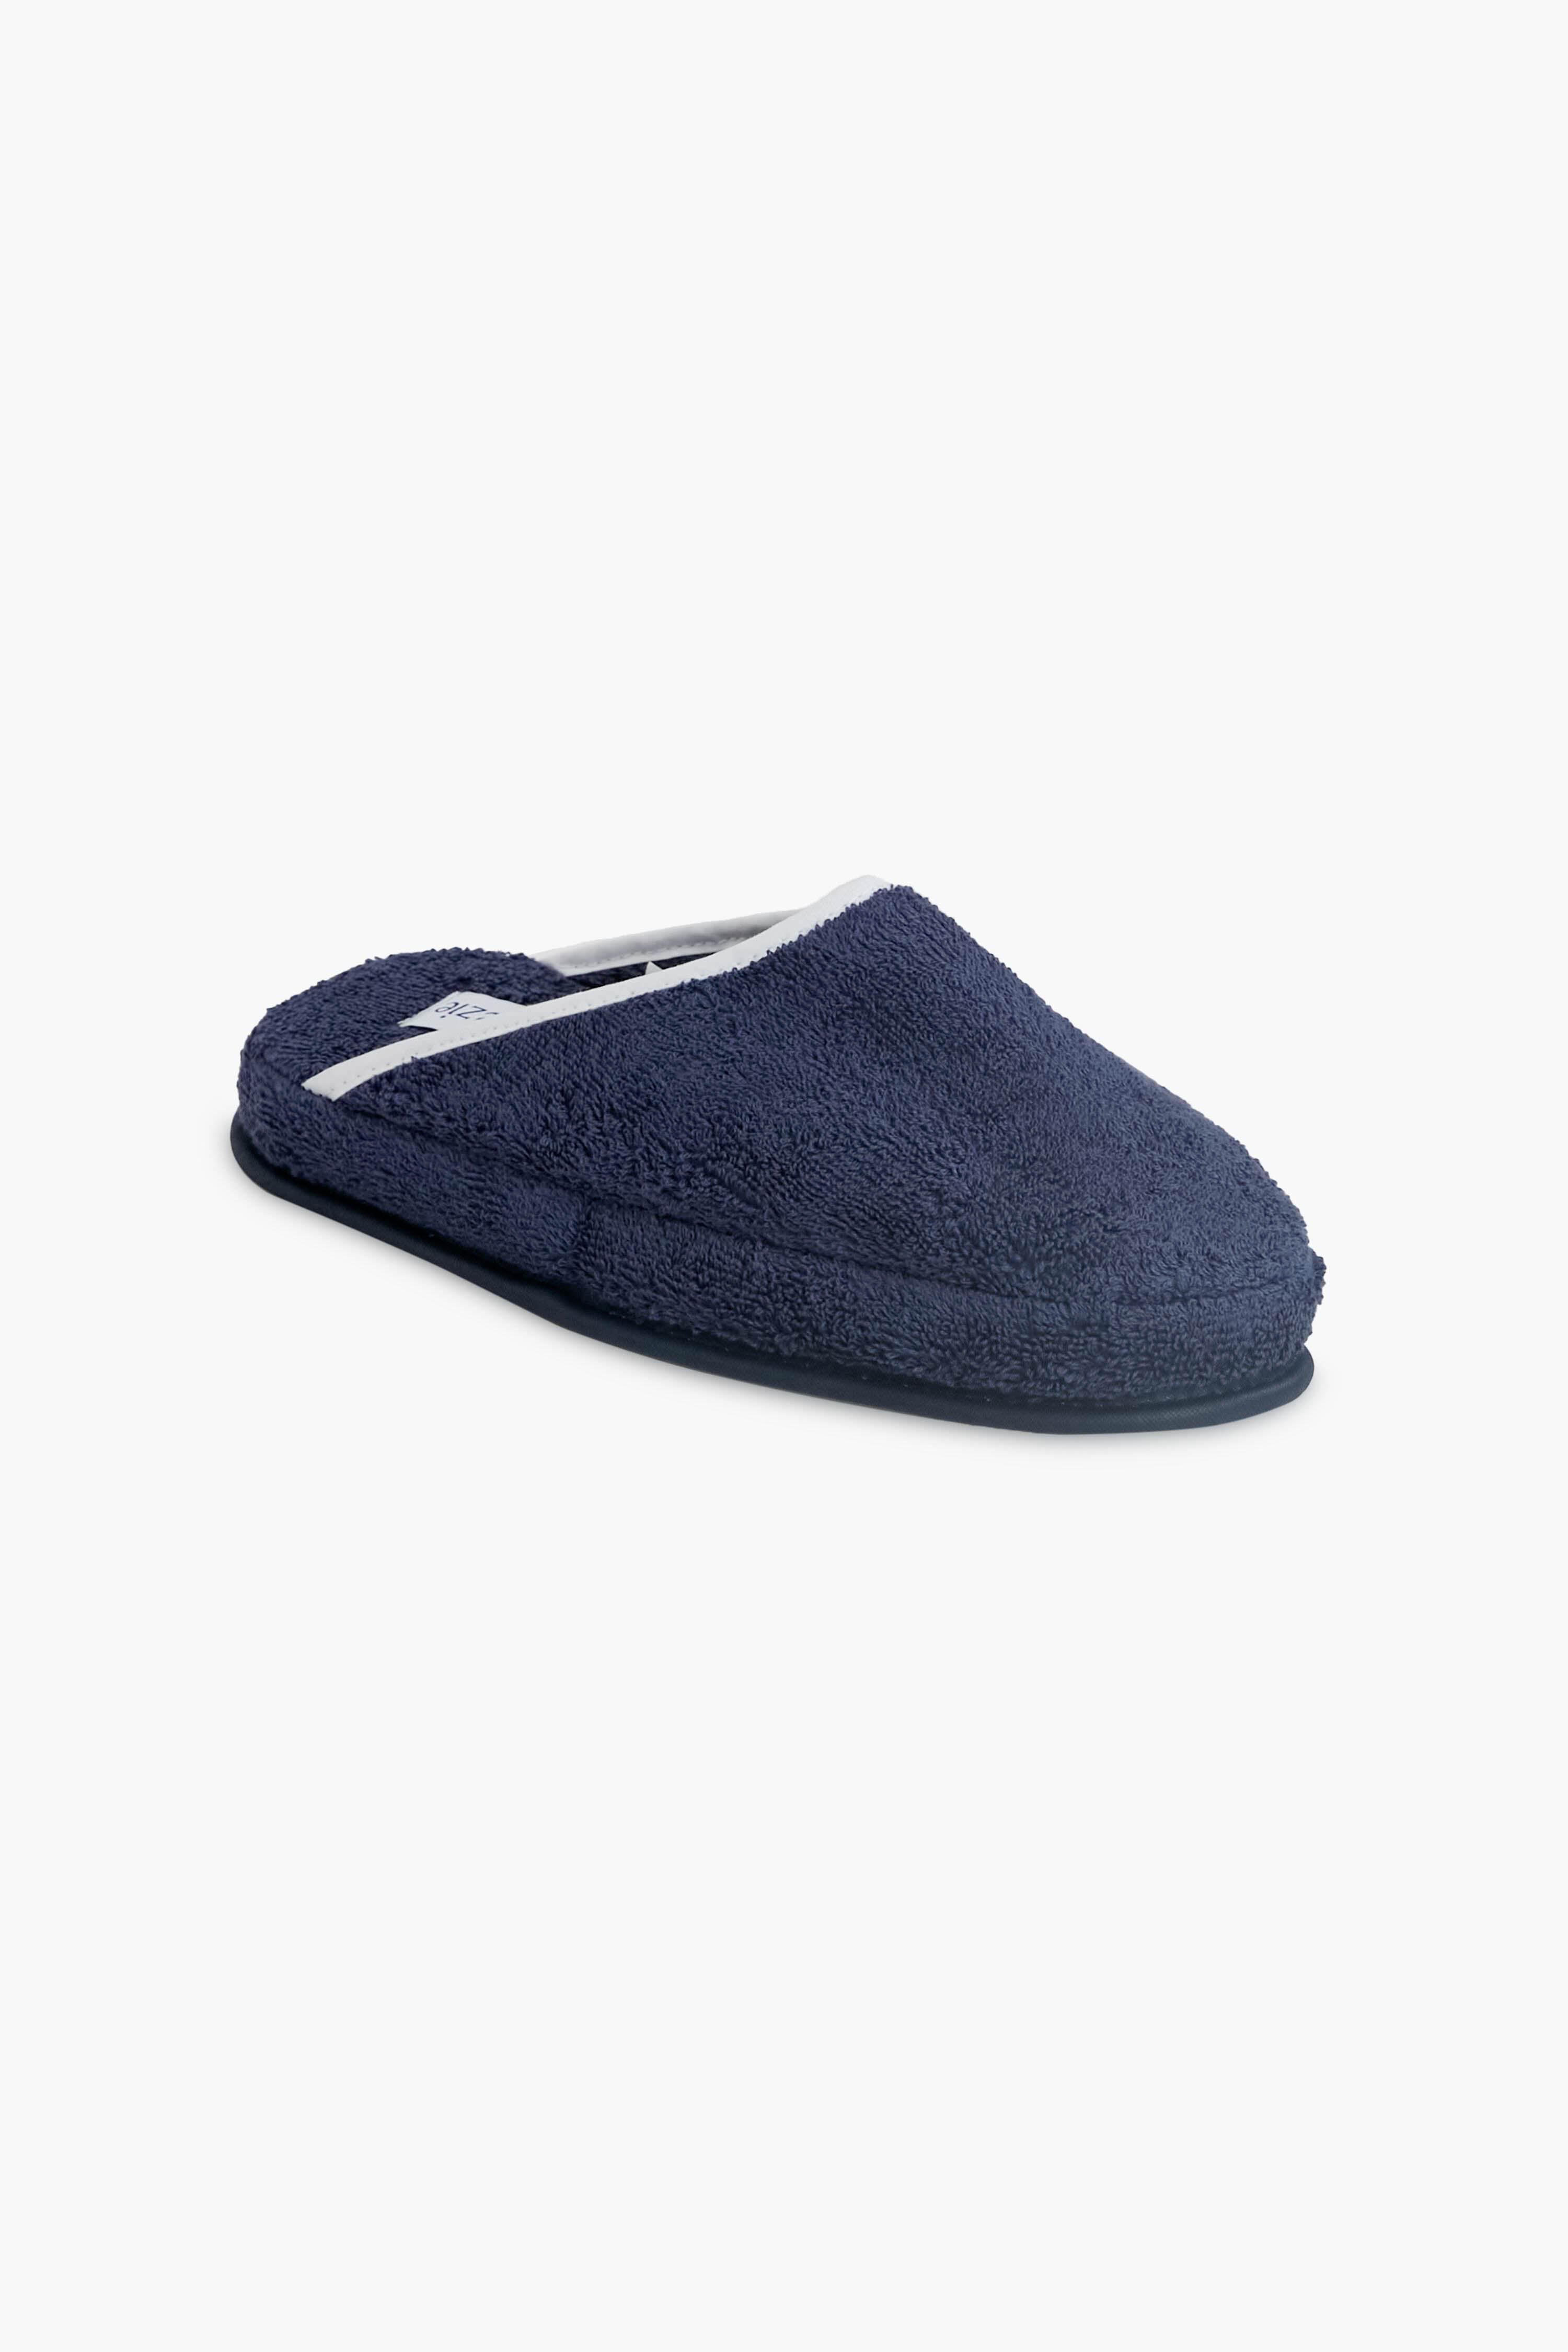 Charvet Suede Slippers in Blue | Lyst